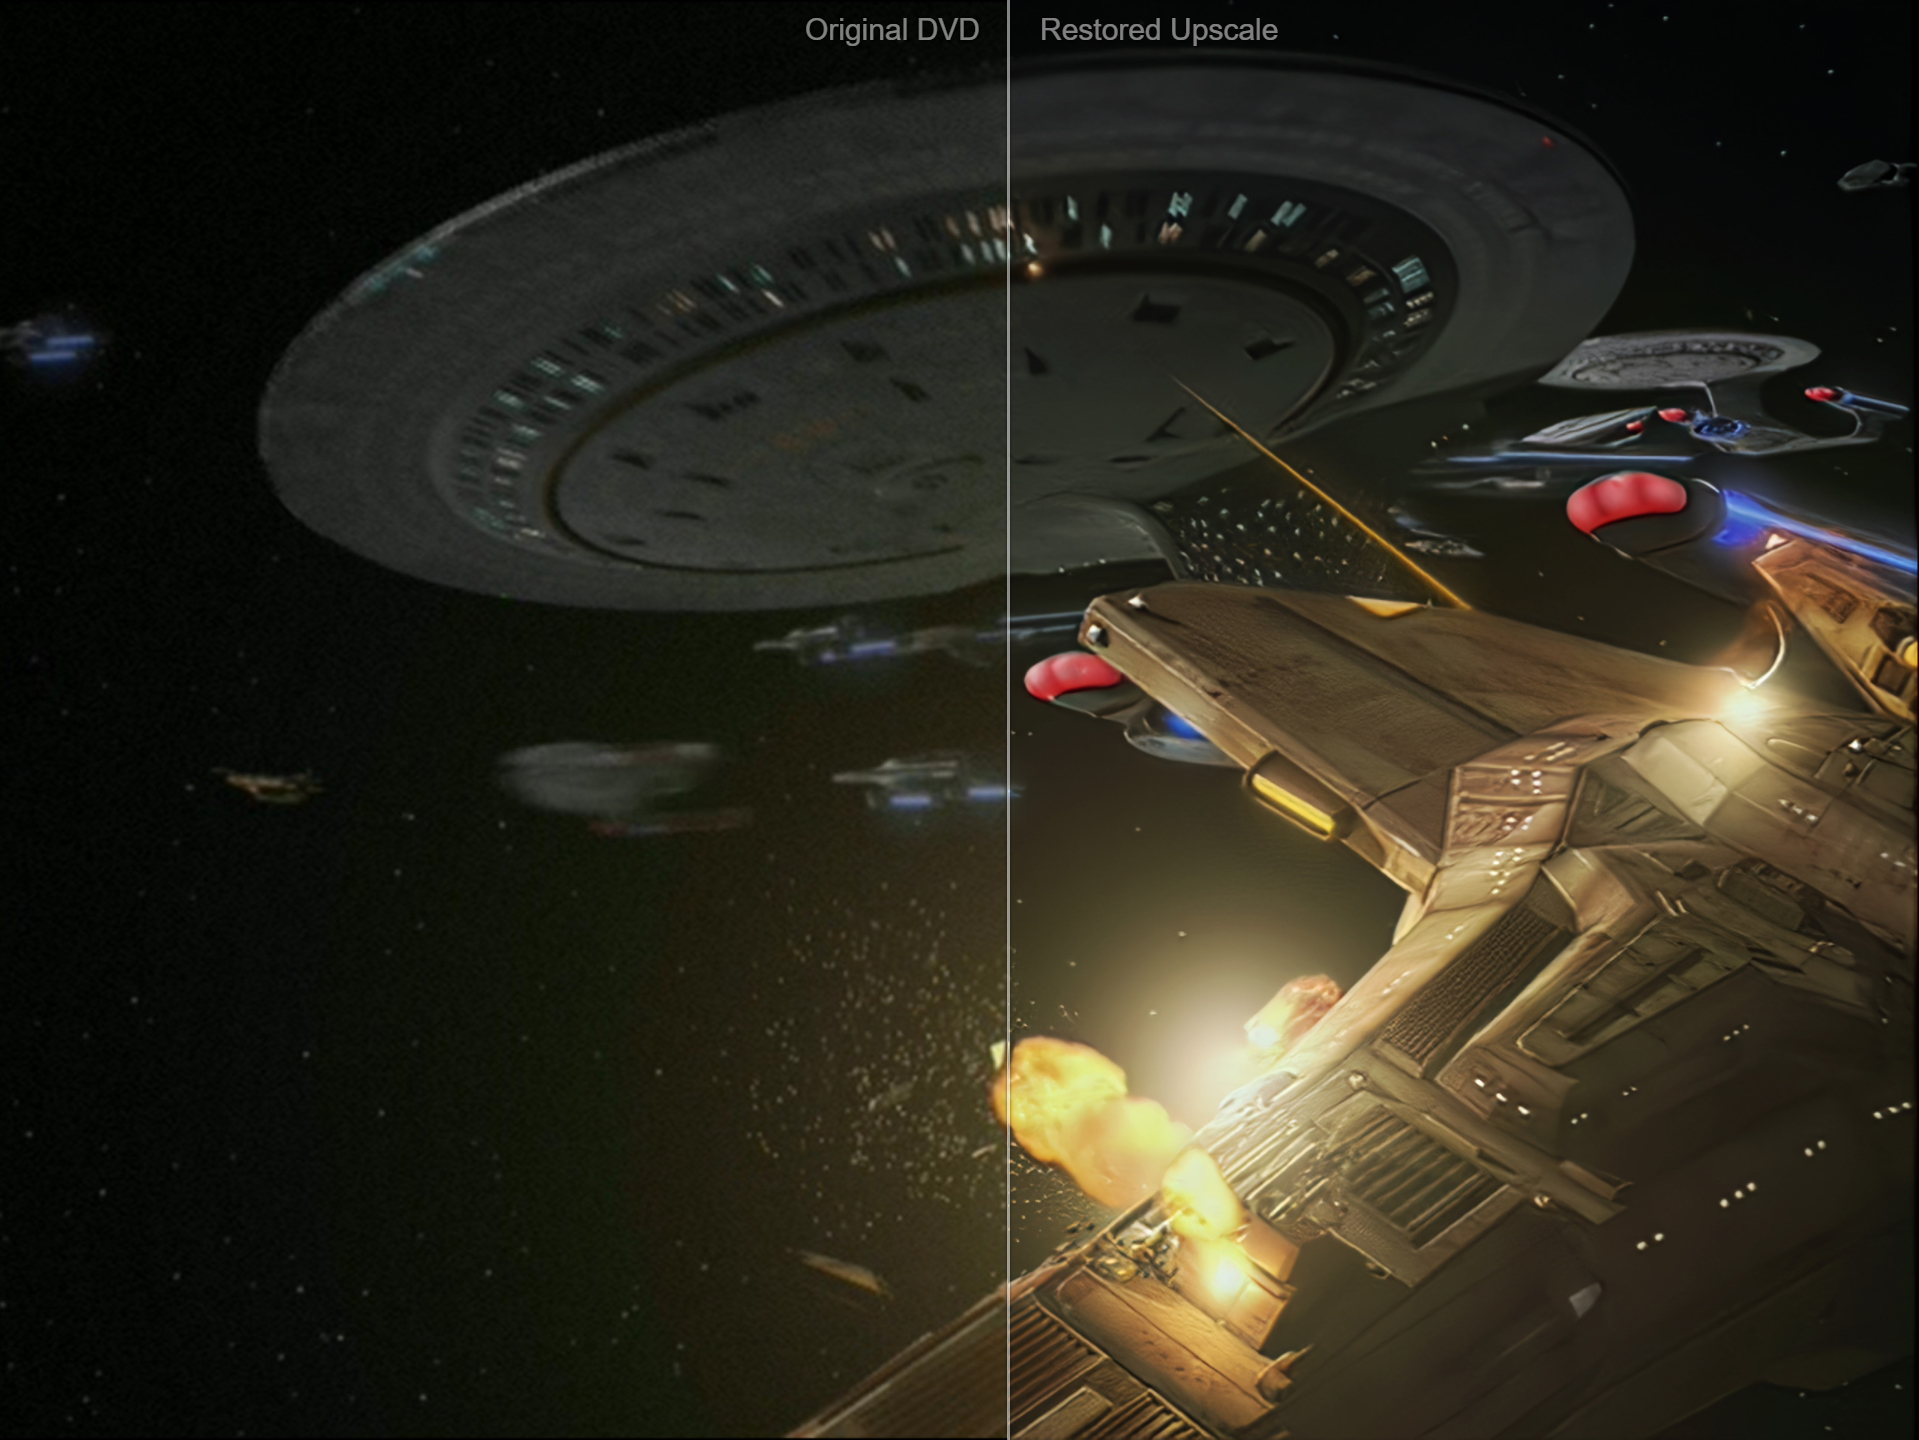 I Can Restore Star Trek Voyager and Deep Space Nine to HD, So Why Can’t Paramount?